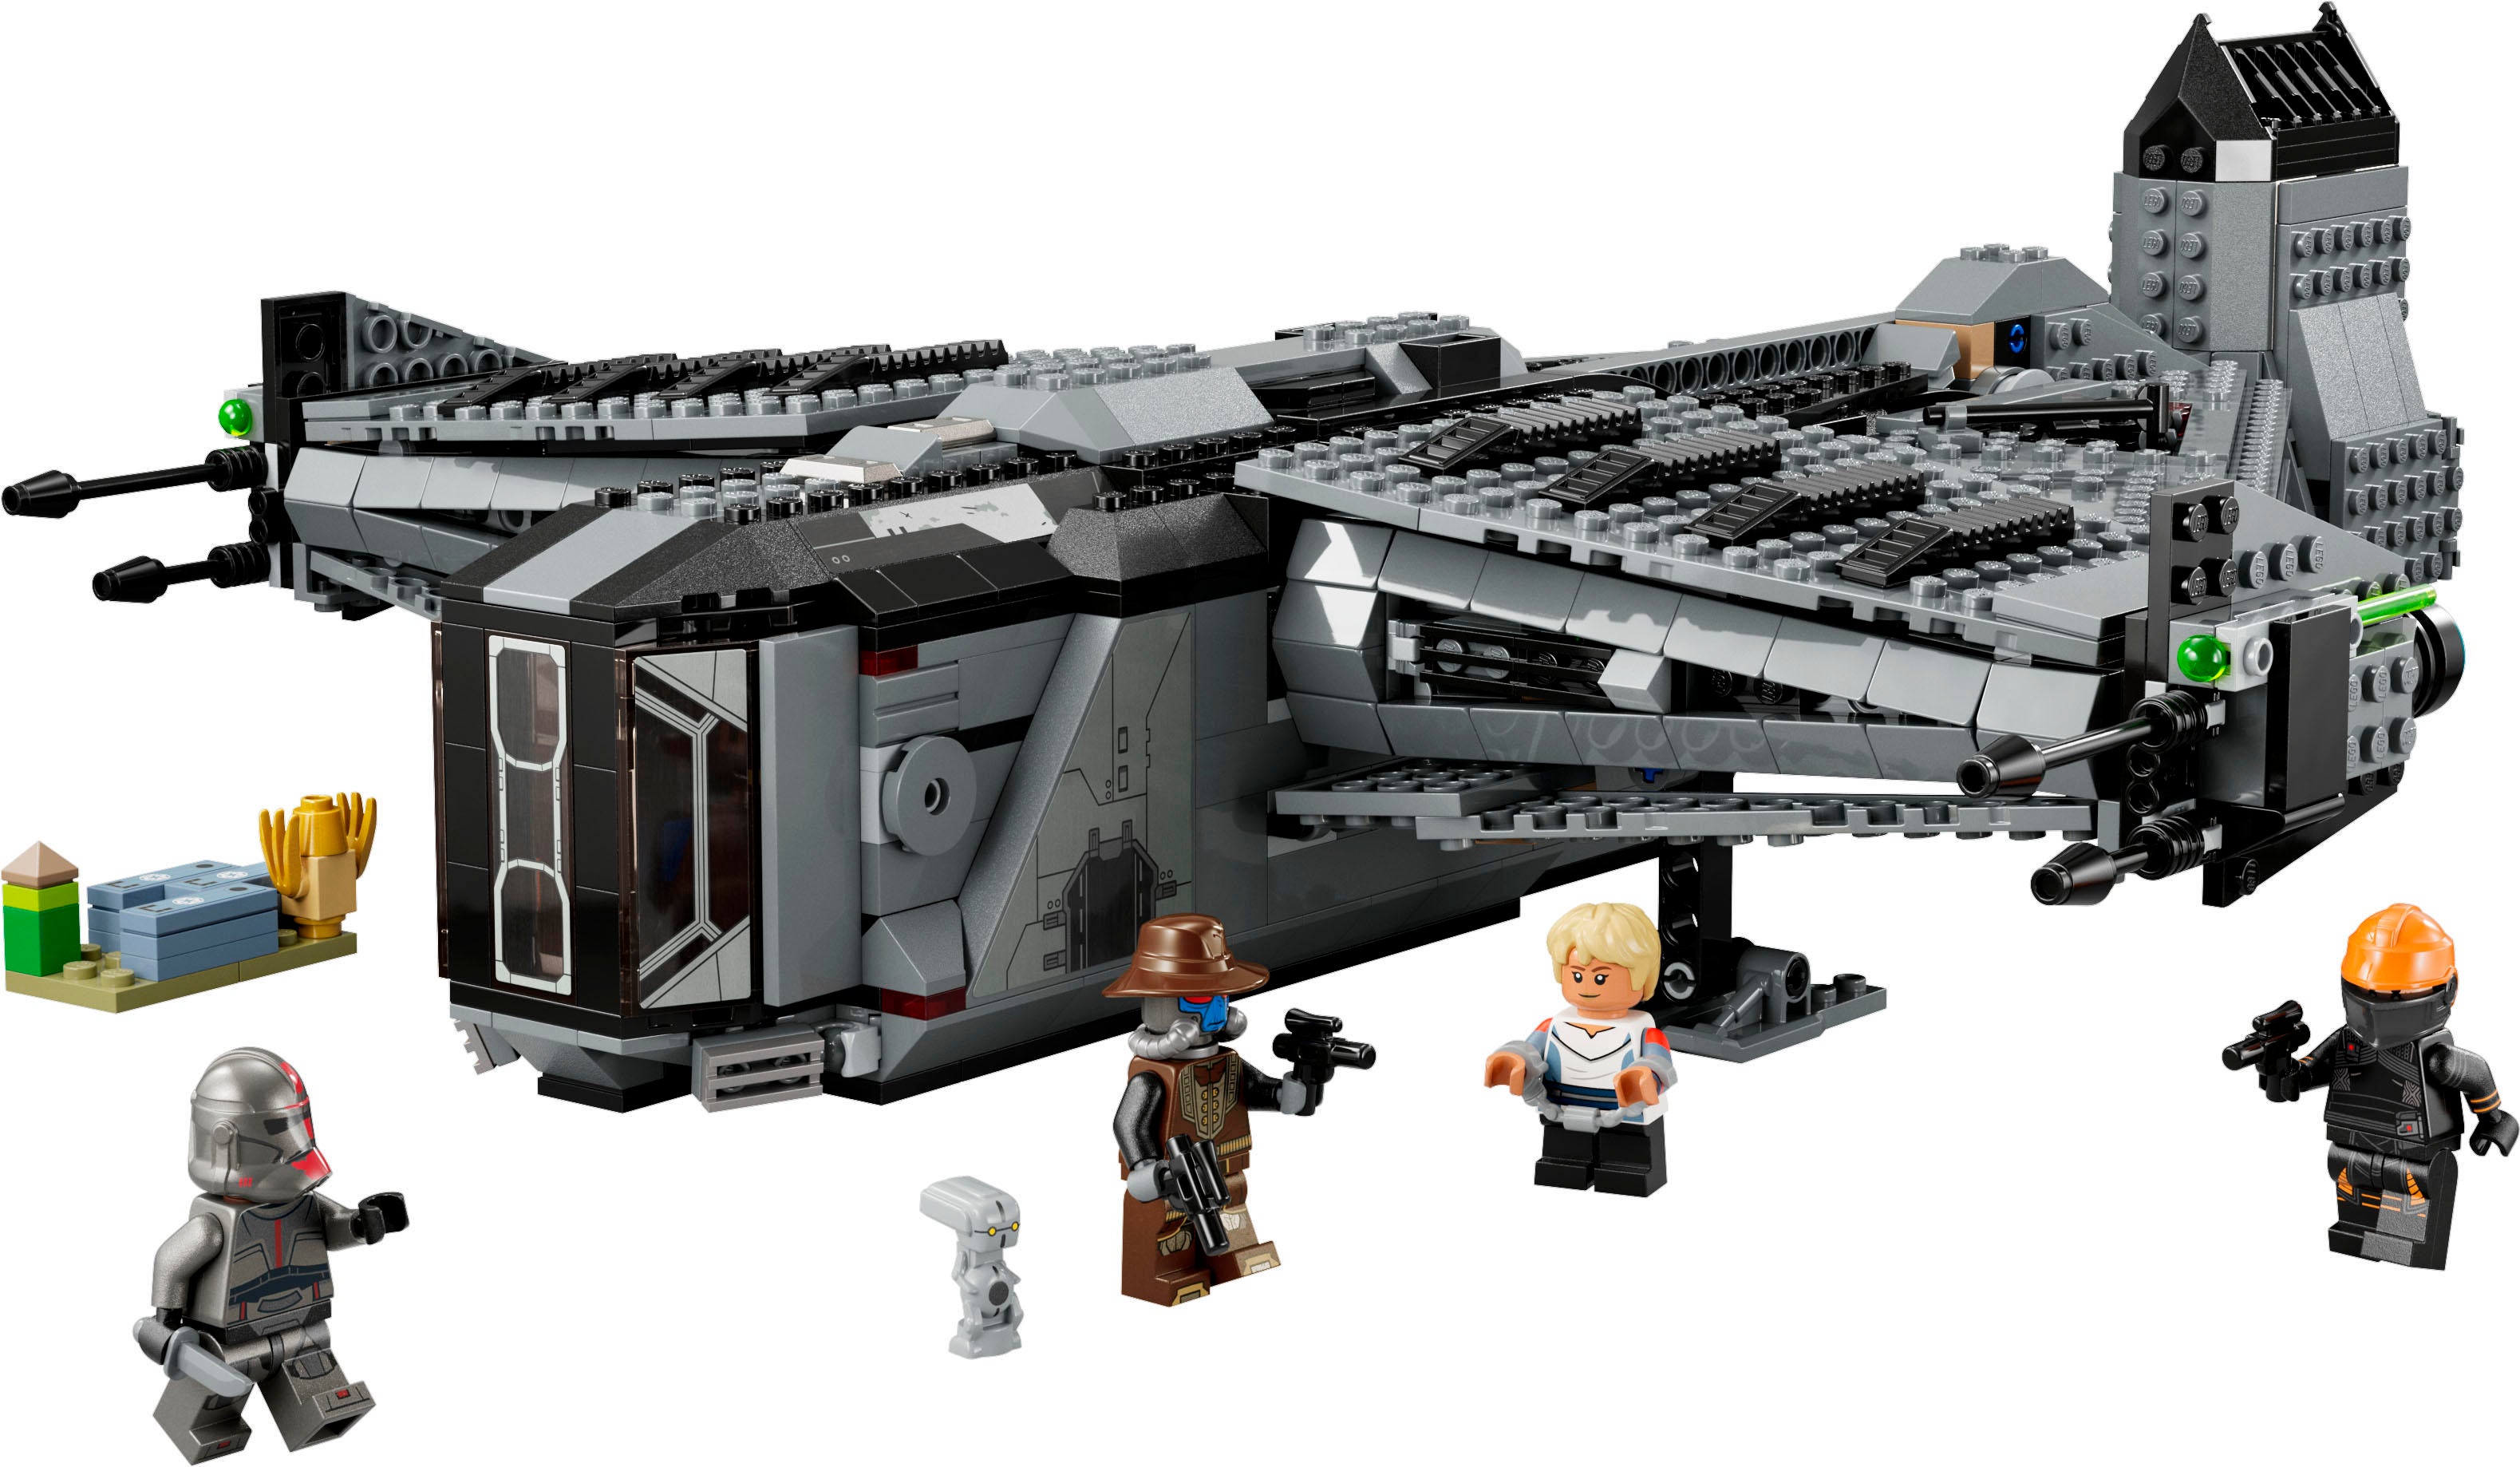 LEGO Star Wars The Justifier and AT-TE Walker Sets Are Launching Soon